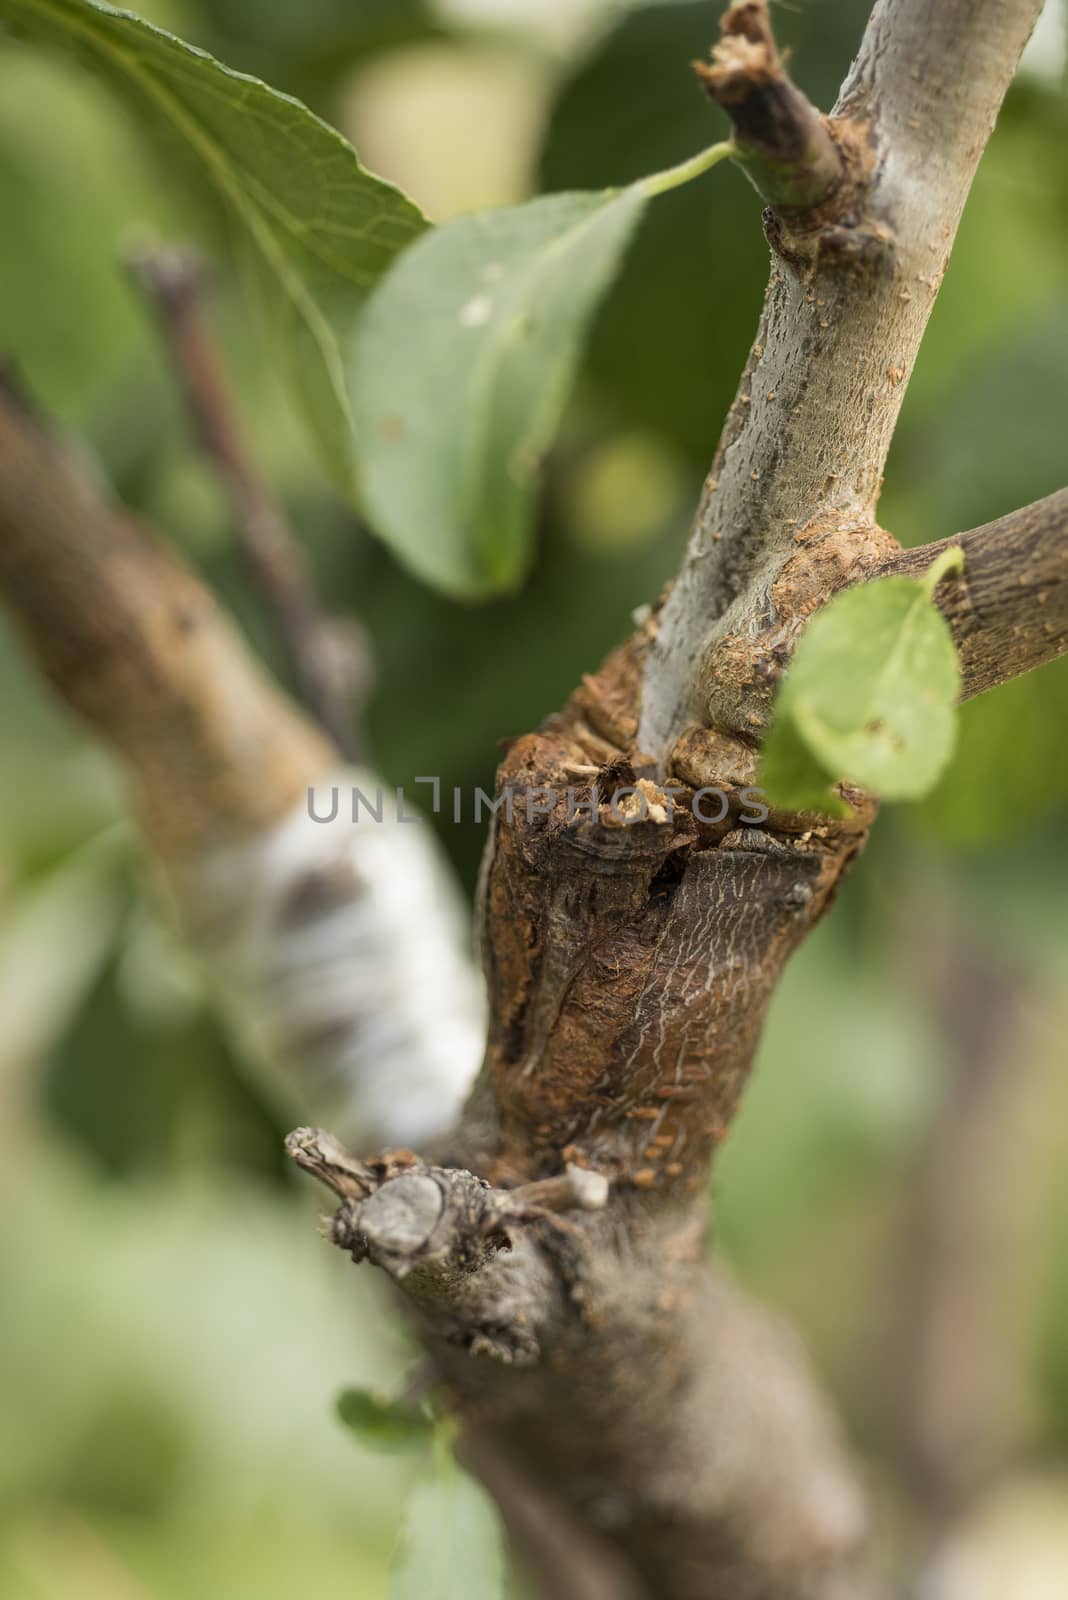 Grafting of fruit trees. Plum on almond tree, works in the garde by jalonsohu@gmail.com